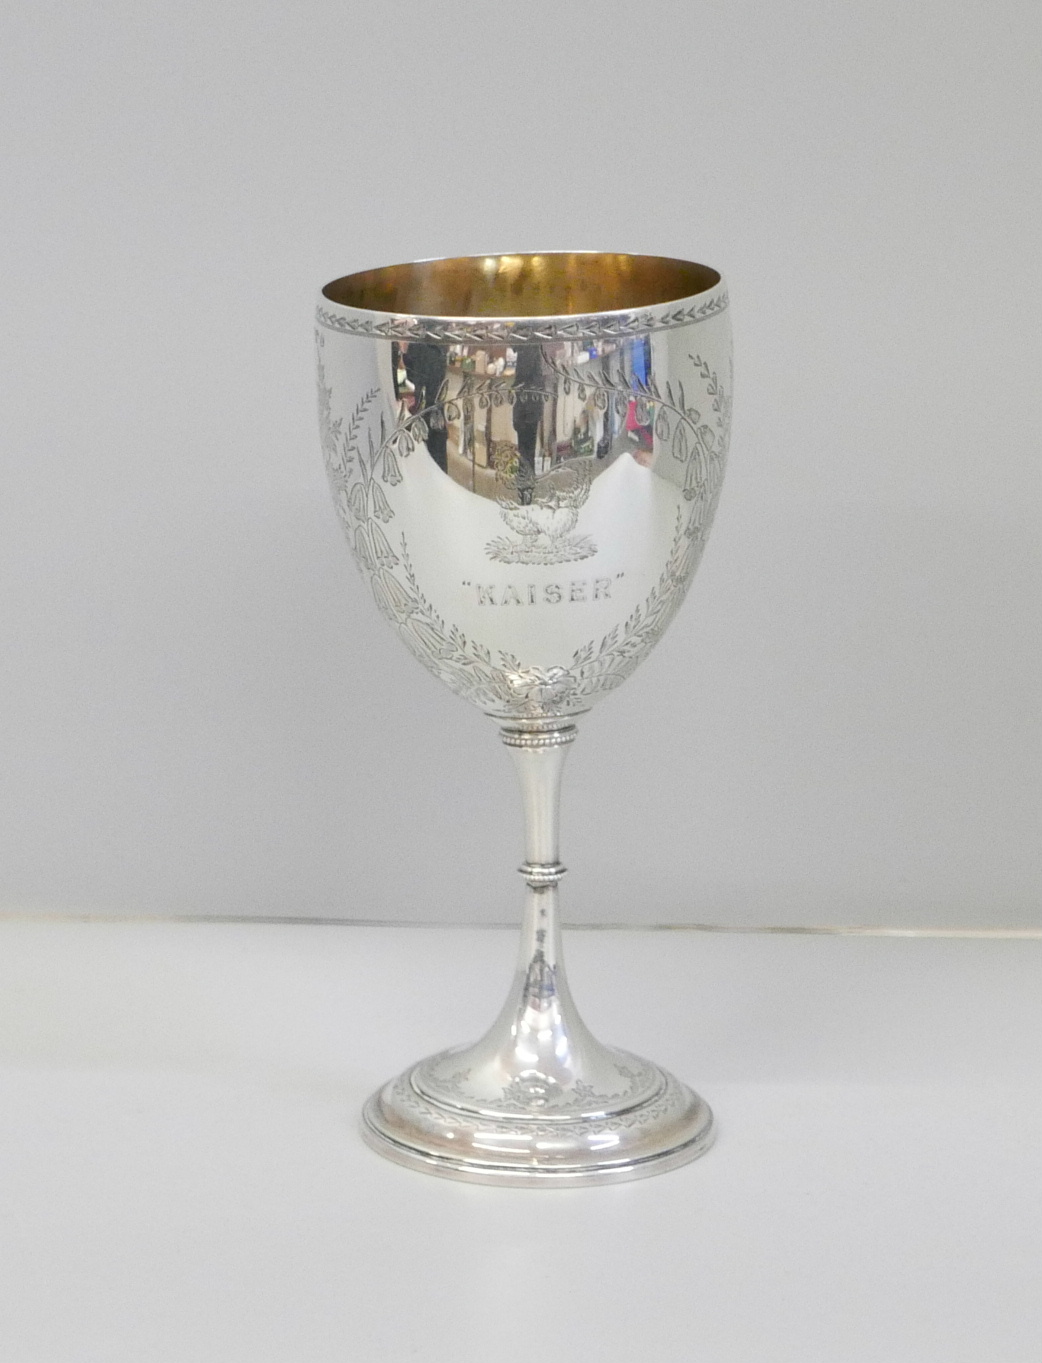 A Victorian silver goblet with cockerel detail and marked 'Kaiser', London 1856, Elkington & Co.,